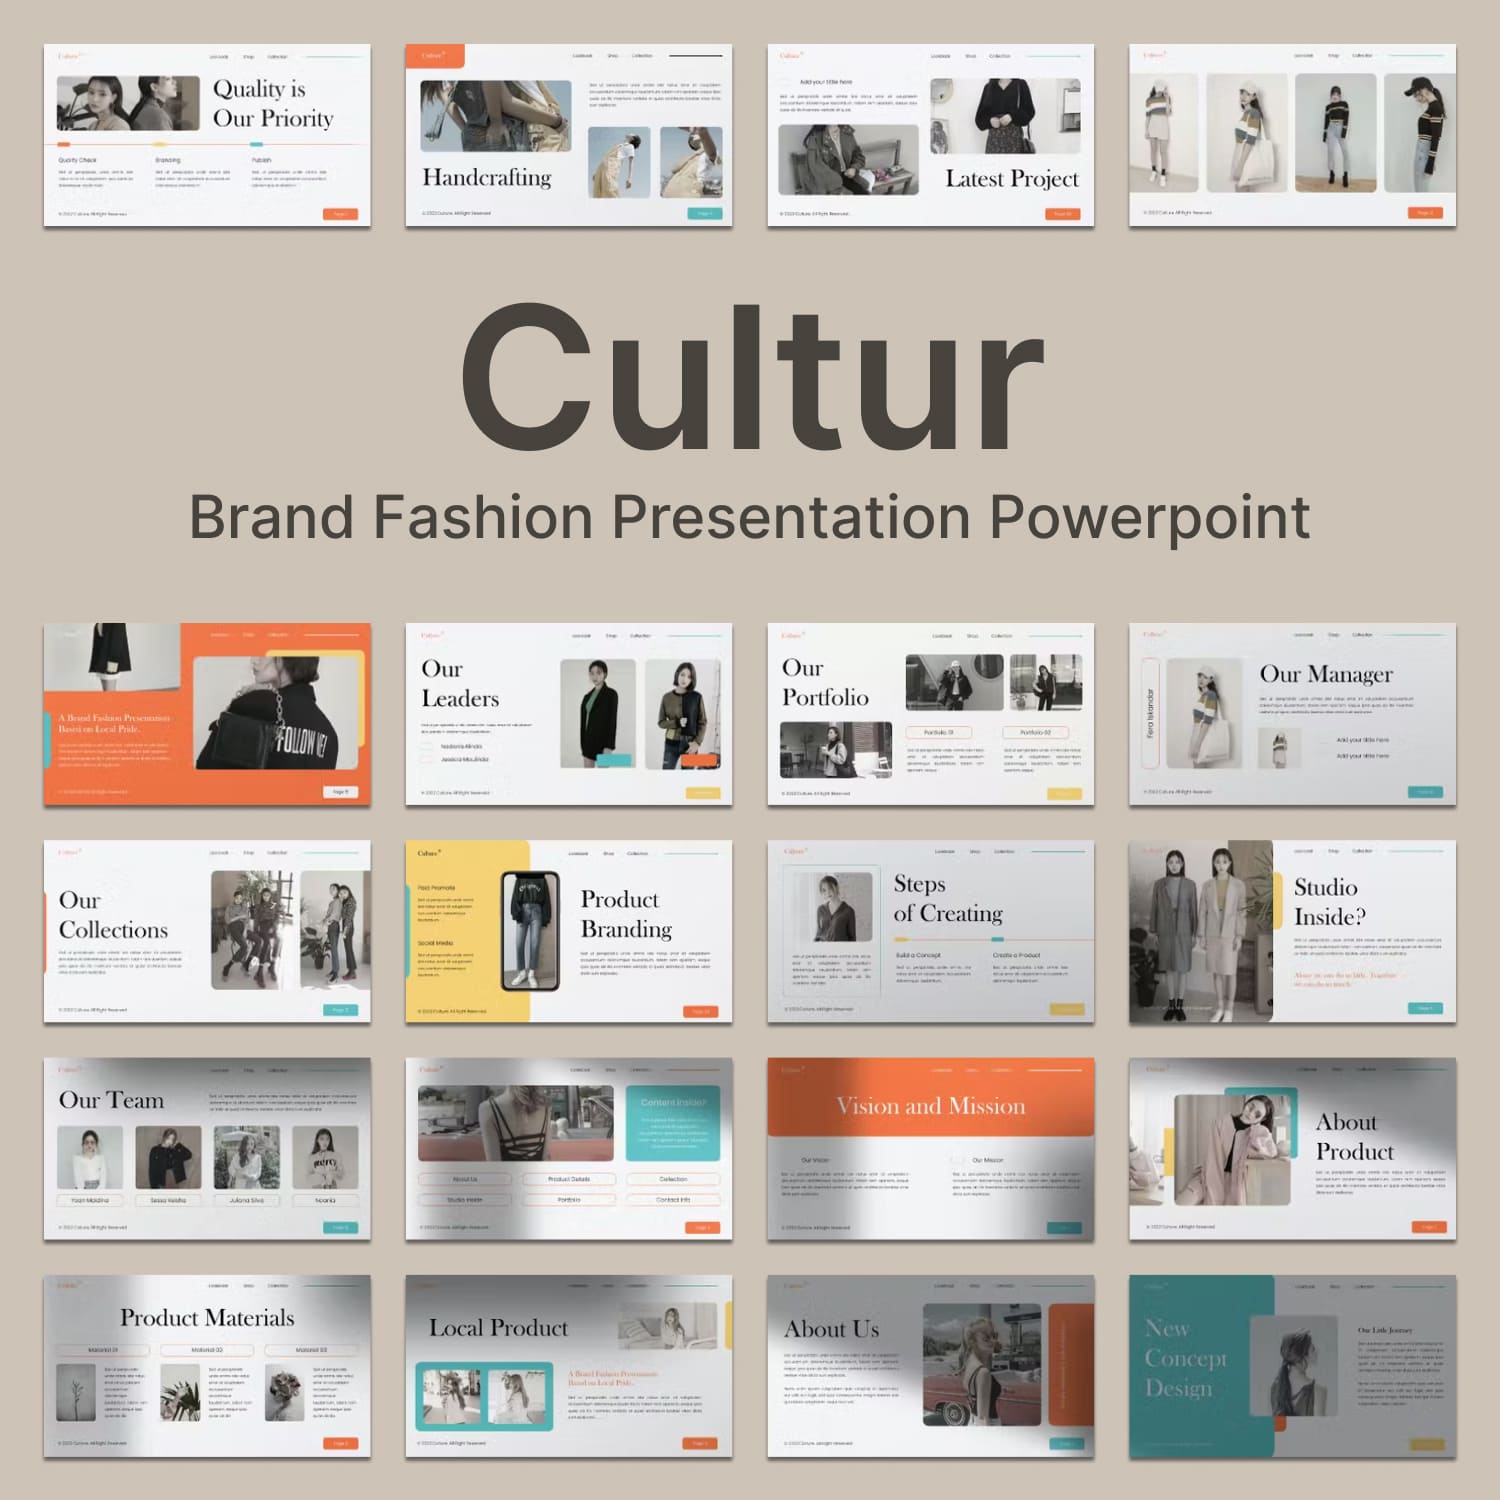 Culture brand fashion presentation powerpoint - main image preview.